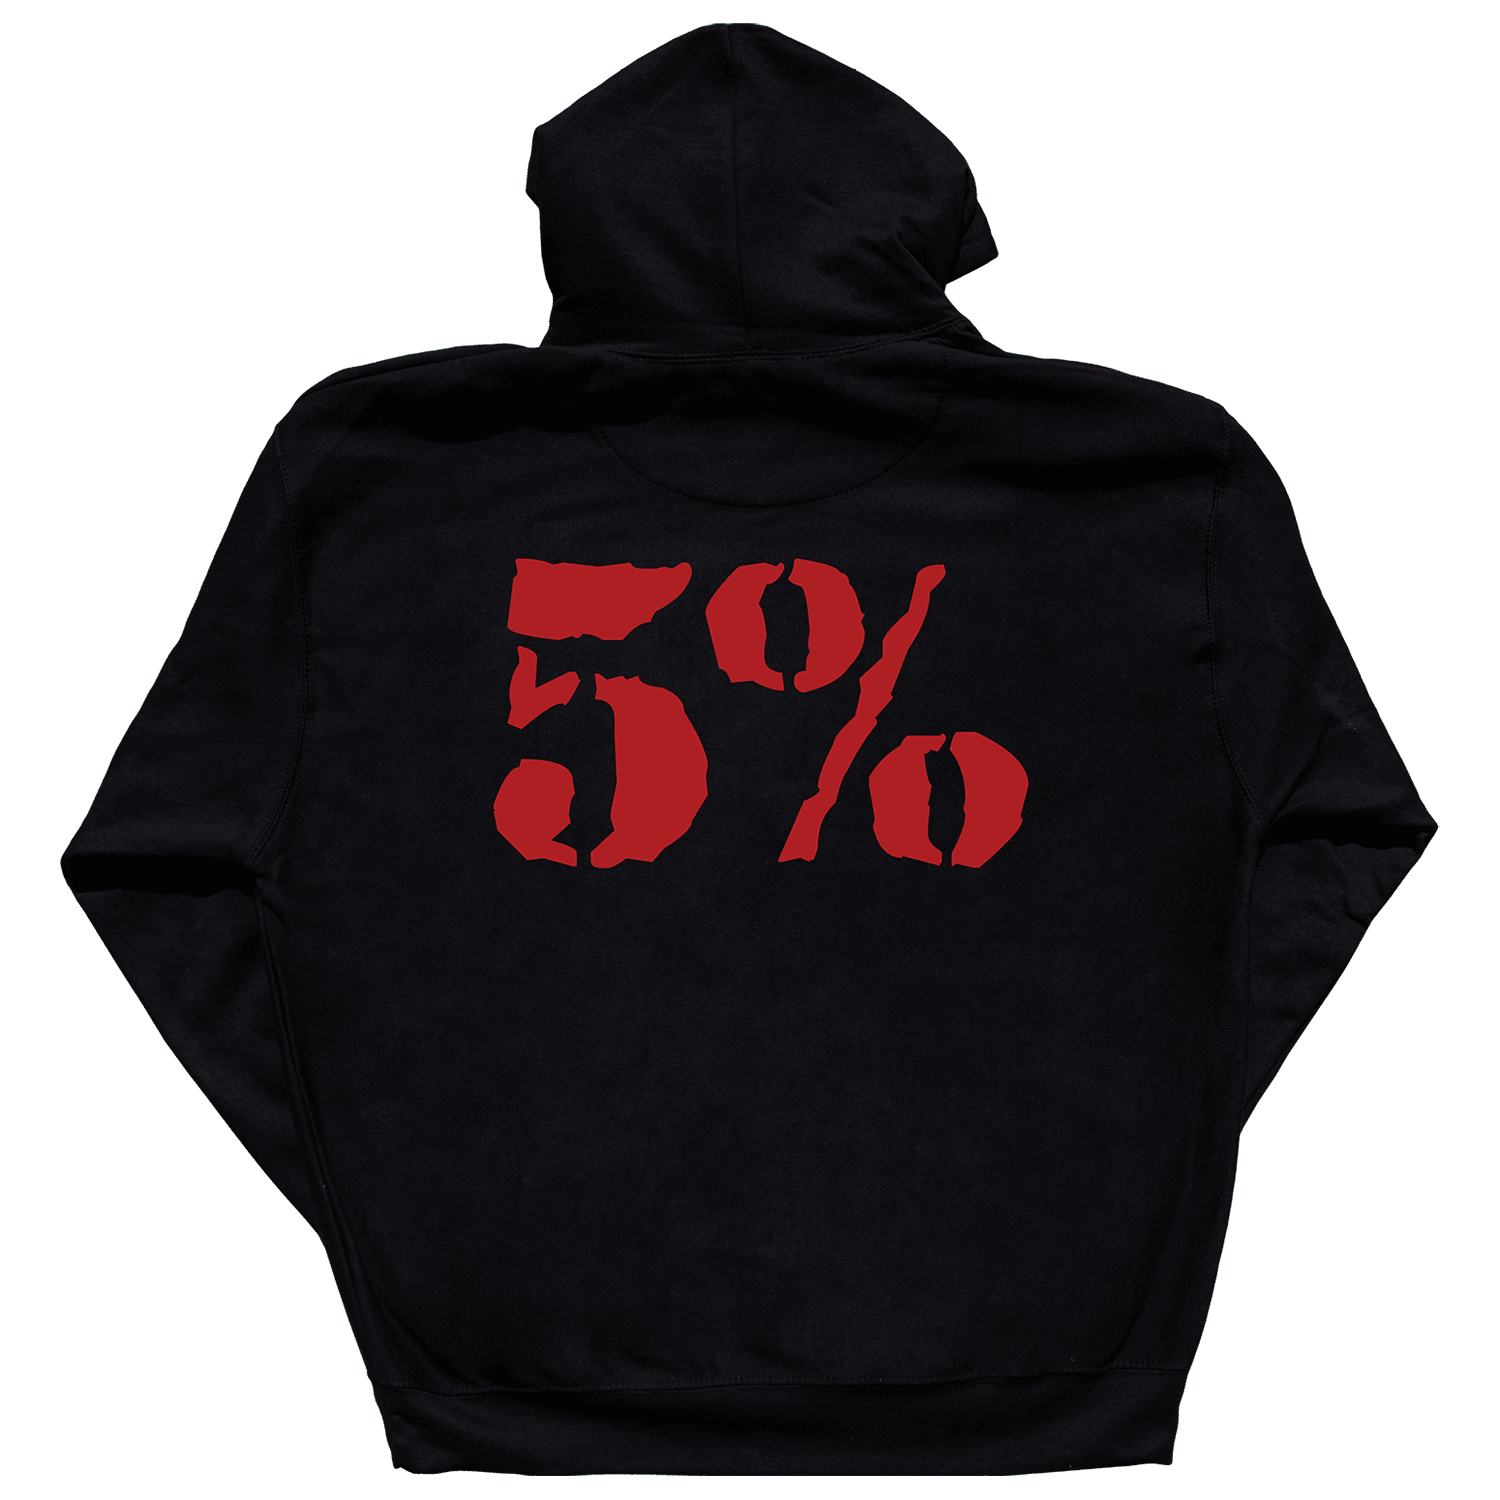 Love It Kill It, Men's Hoodie in Black with Red Graphics - 5% Nutrition